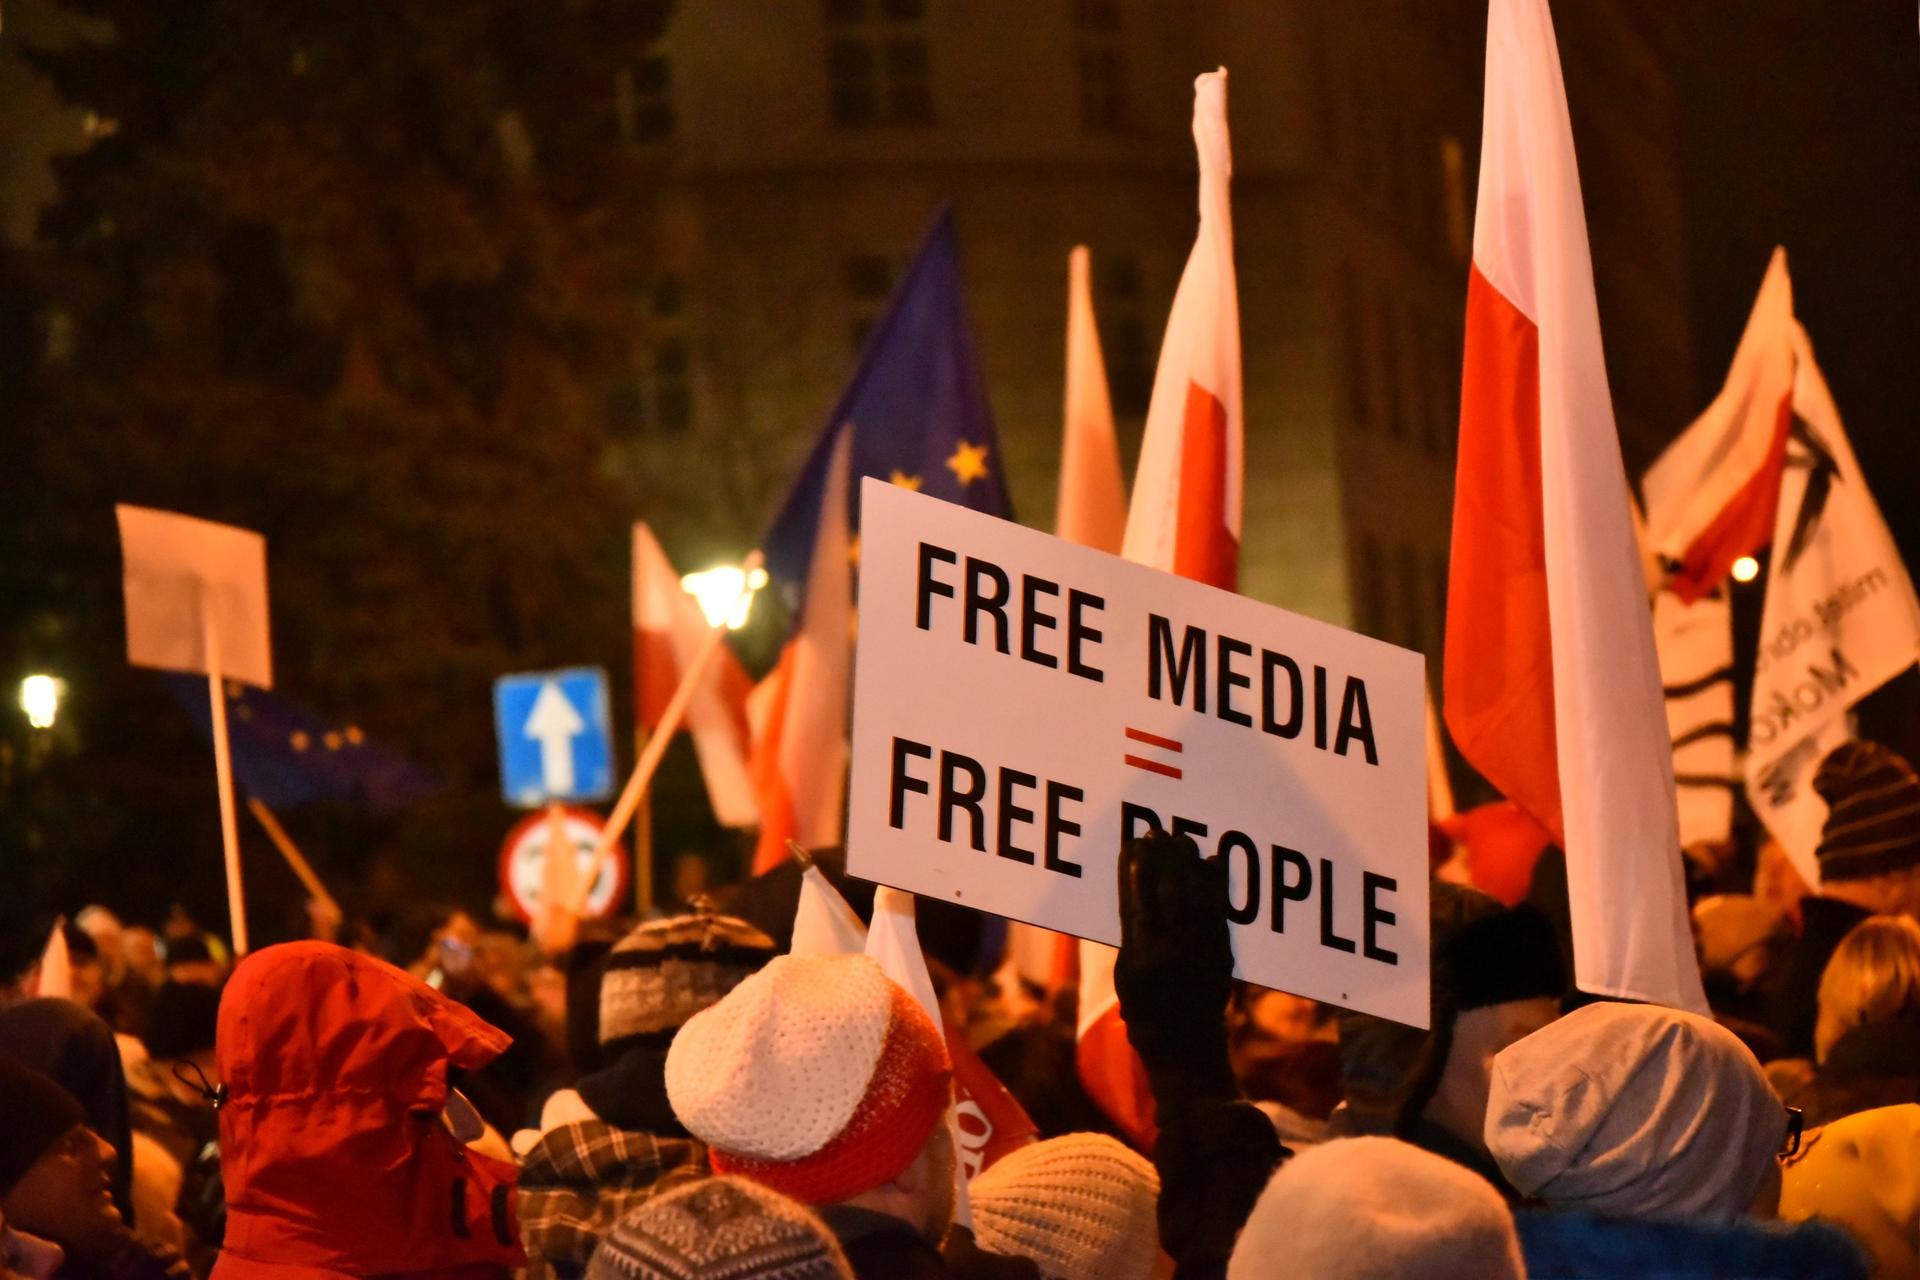 Polish protestors demonstrate their opposition to new restrictions for media in front of the parliament building in Warsaw, Poland.